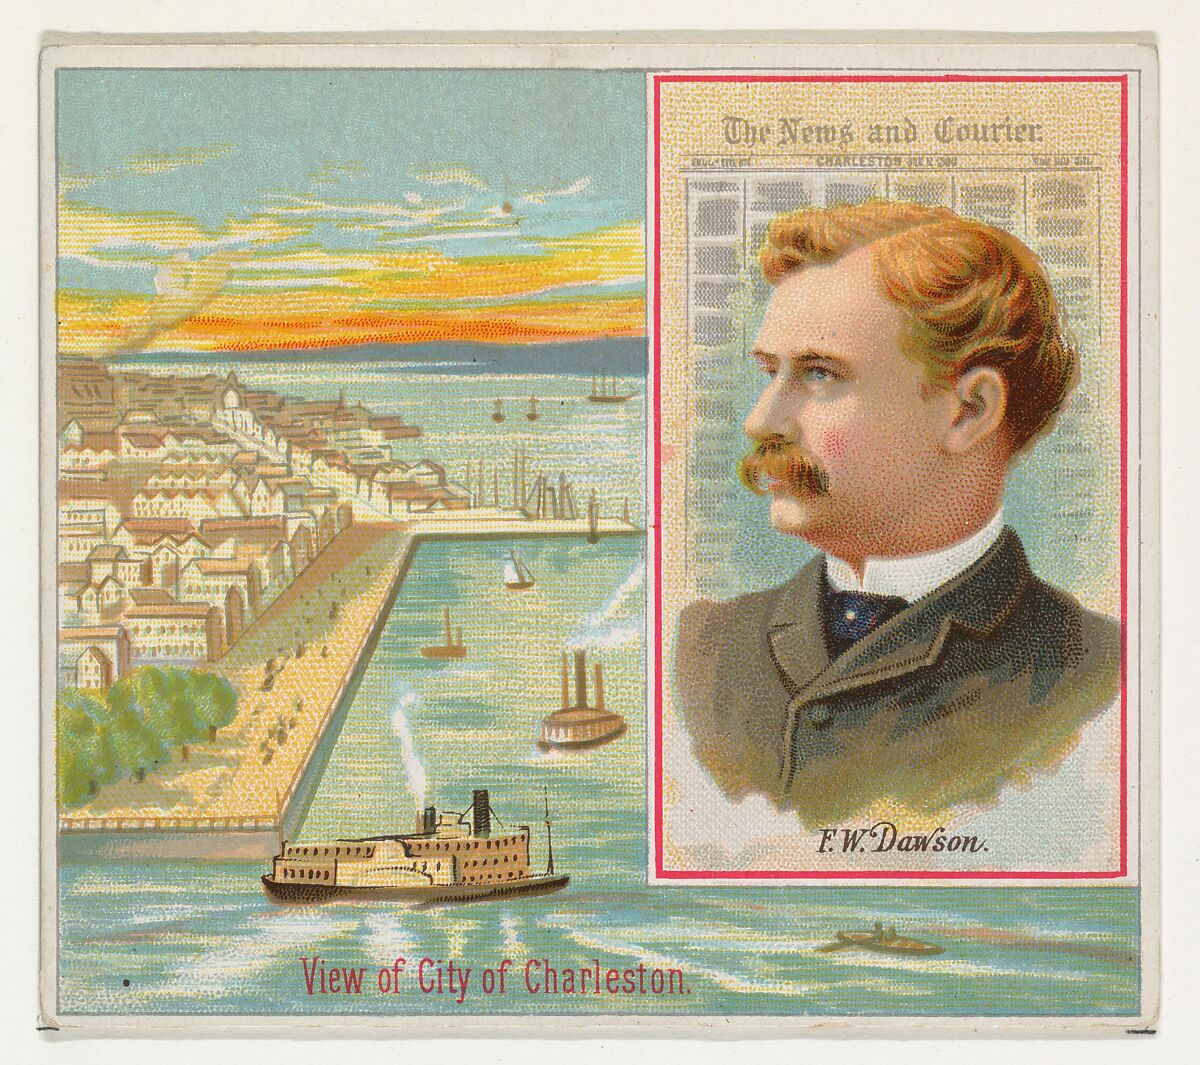 F.W. Dawson, The Charleston News and Courier, from the American Editors series (N35) for Allen & Ginter Cigarettes, Issued by Allen &amp; Ginter (American, Richmond, Virginia), Commercial color lithograph 